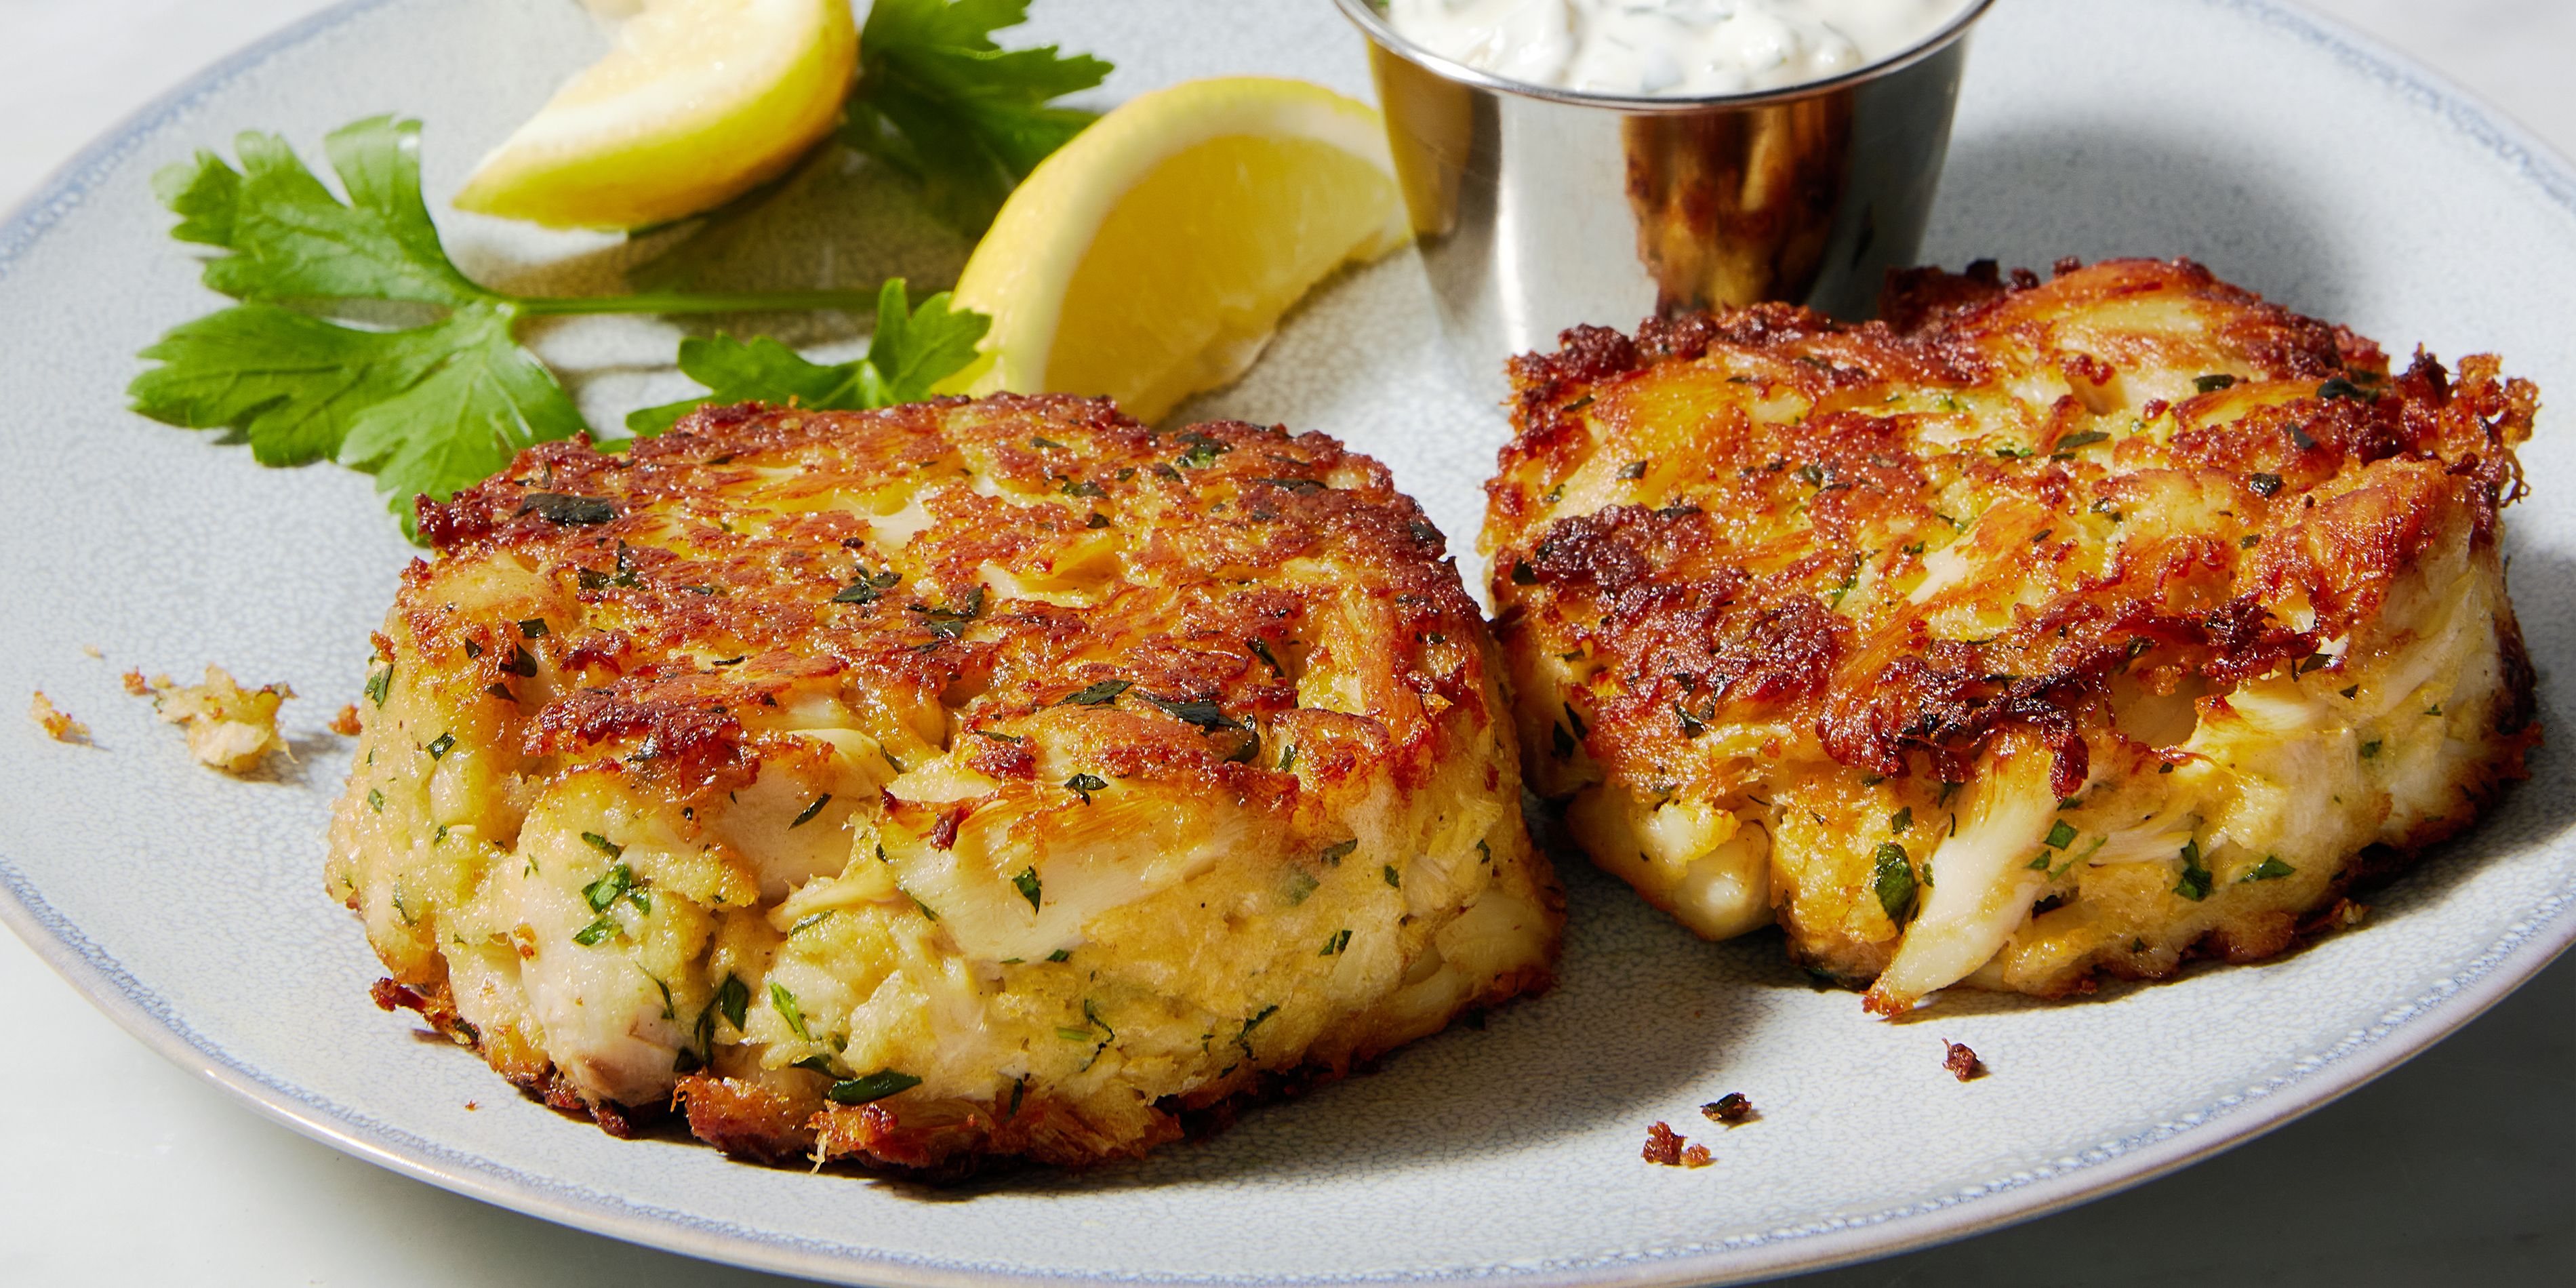 Sometimes Foodie: Maryland and Boardwalk Style Crab Cakes - Aldi $4.99 each